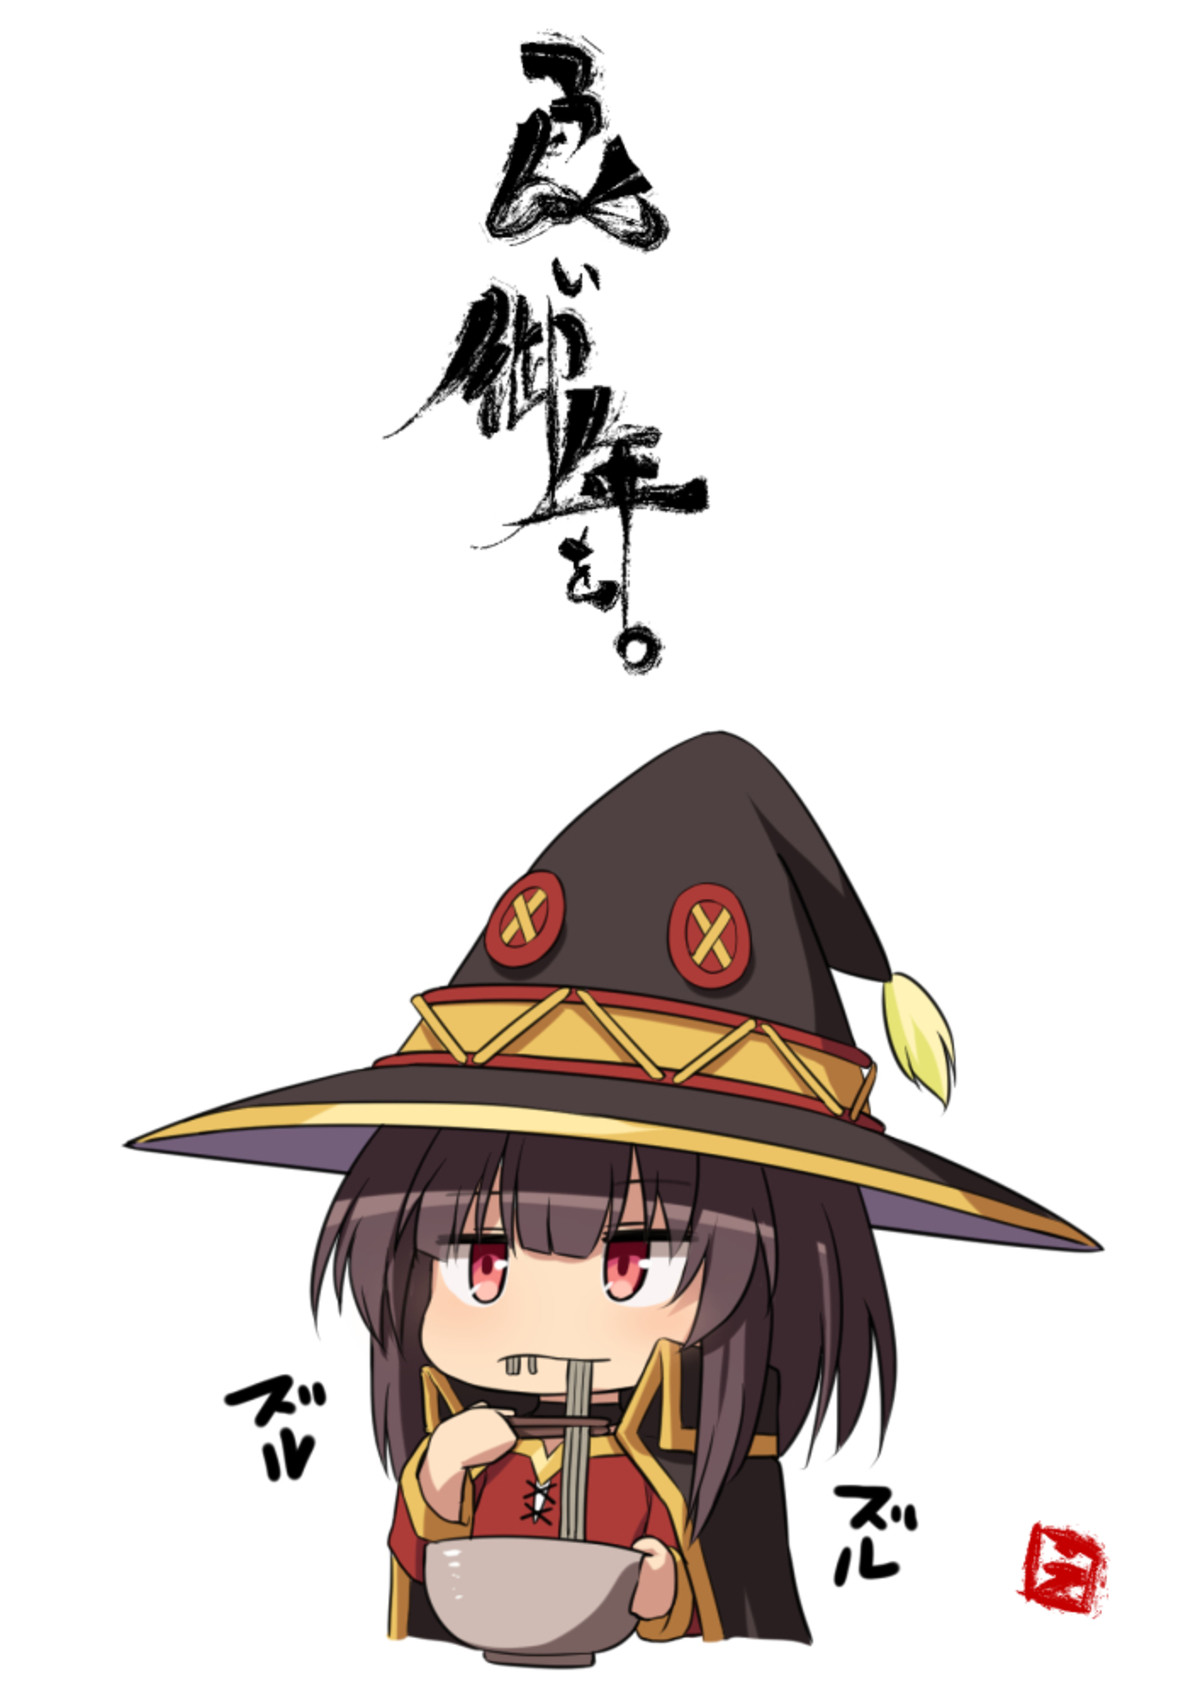 Daily Megu - 1041: Sluuurp~. join list: DailySplosion (827 subs)Mention History Source: .. For a second there I thought she was holding scissors. 